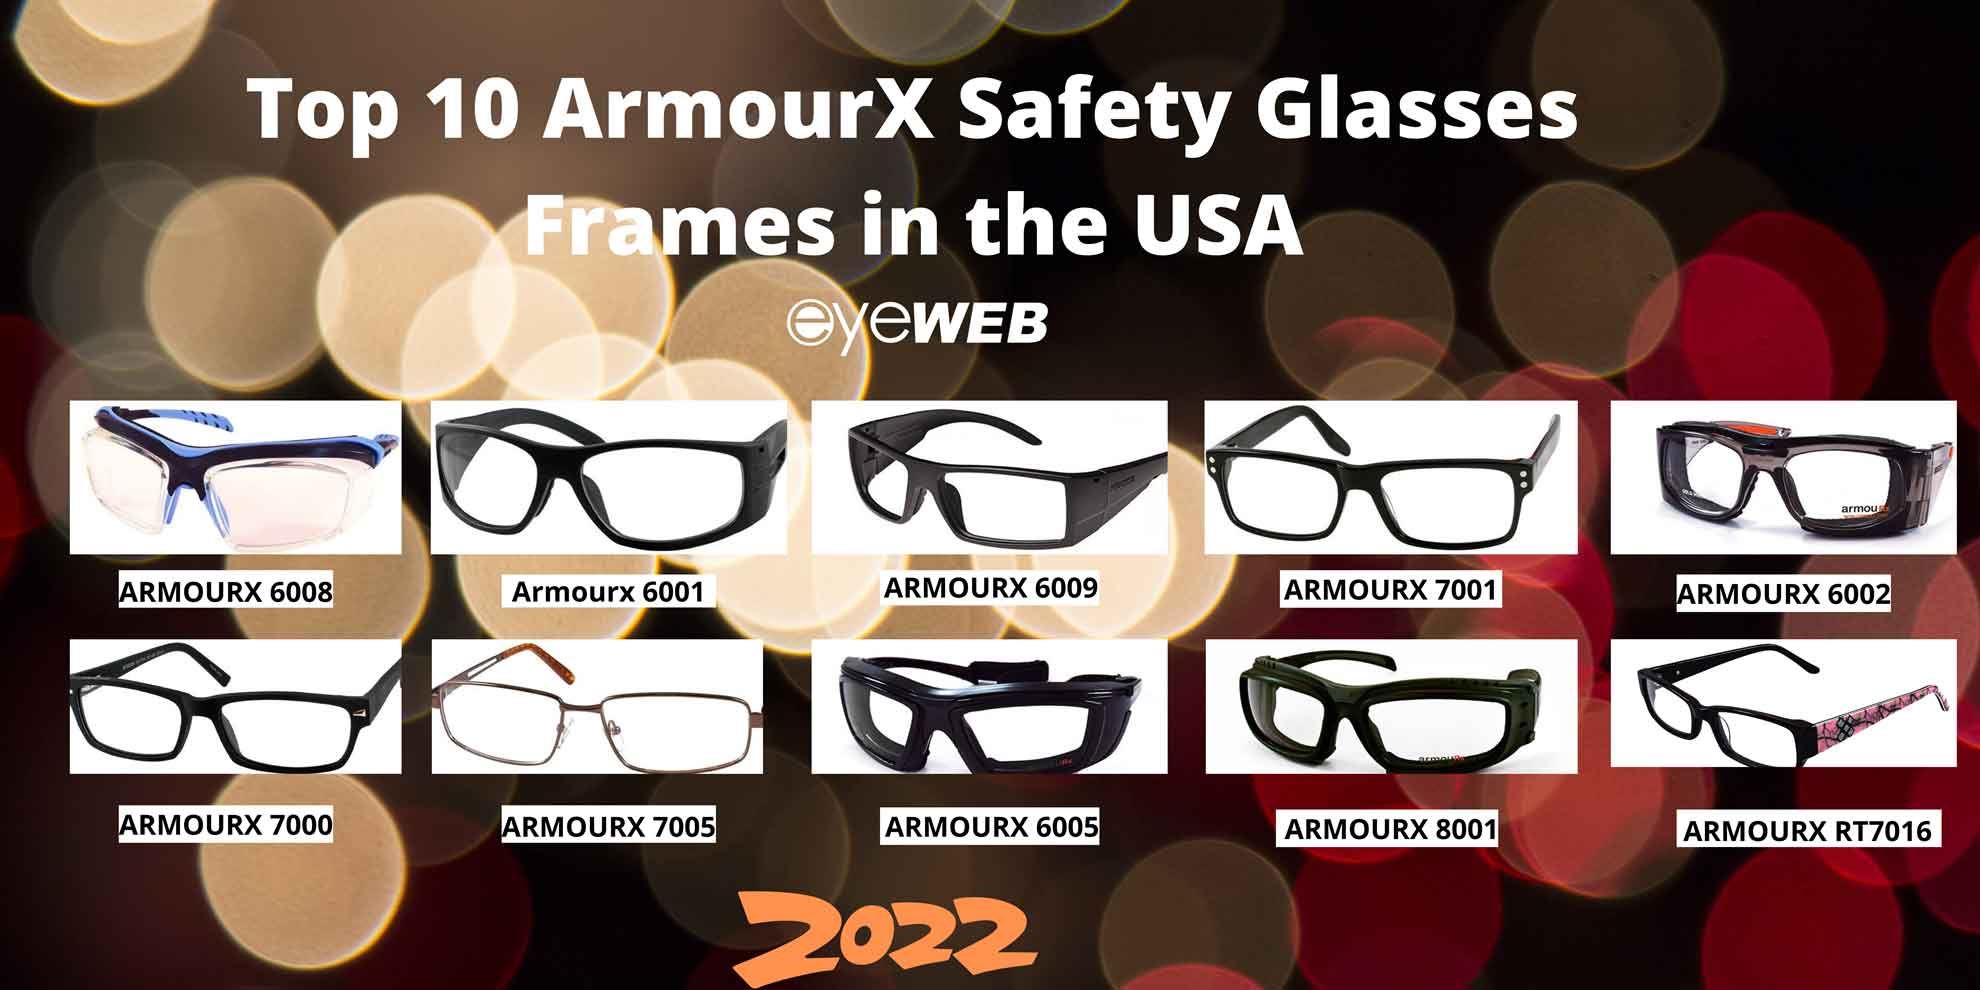 Top 9 ArmourX Safety Glasses Frames in the USA